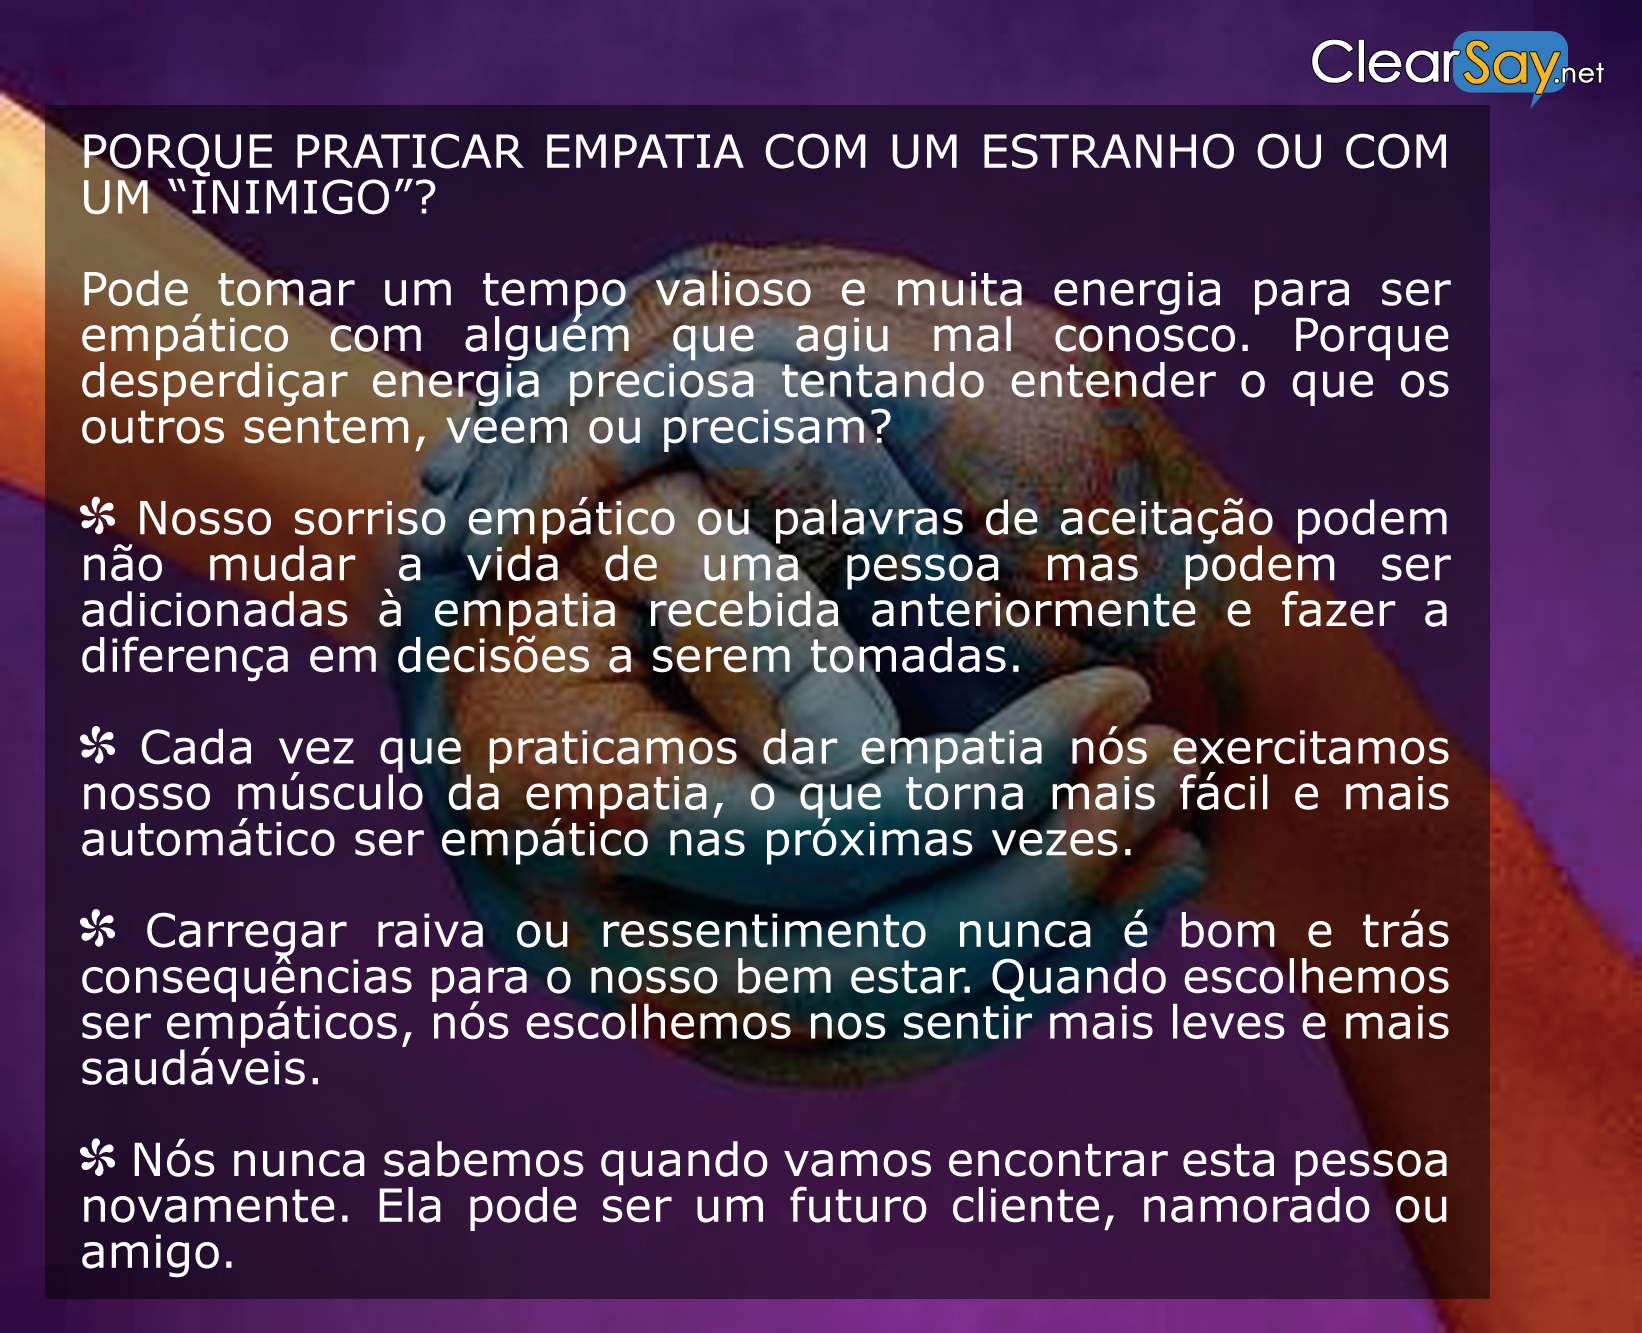 why-practice-empathy-with-enemy-portuguese-02.png